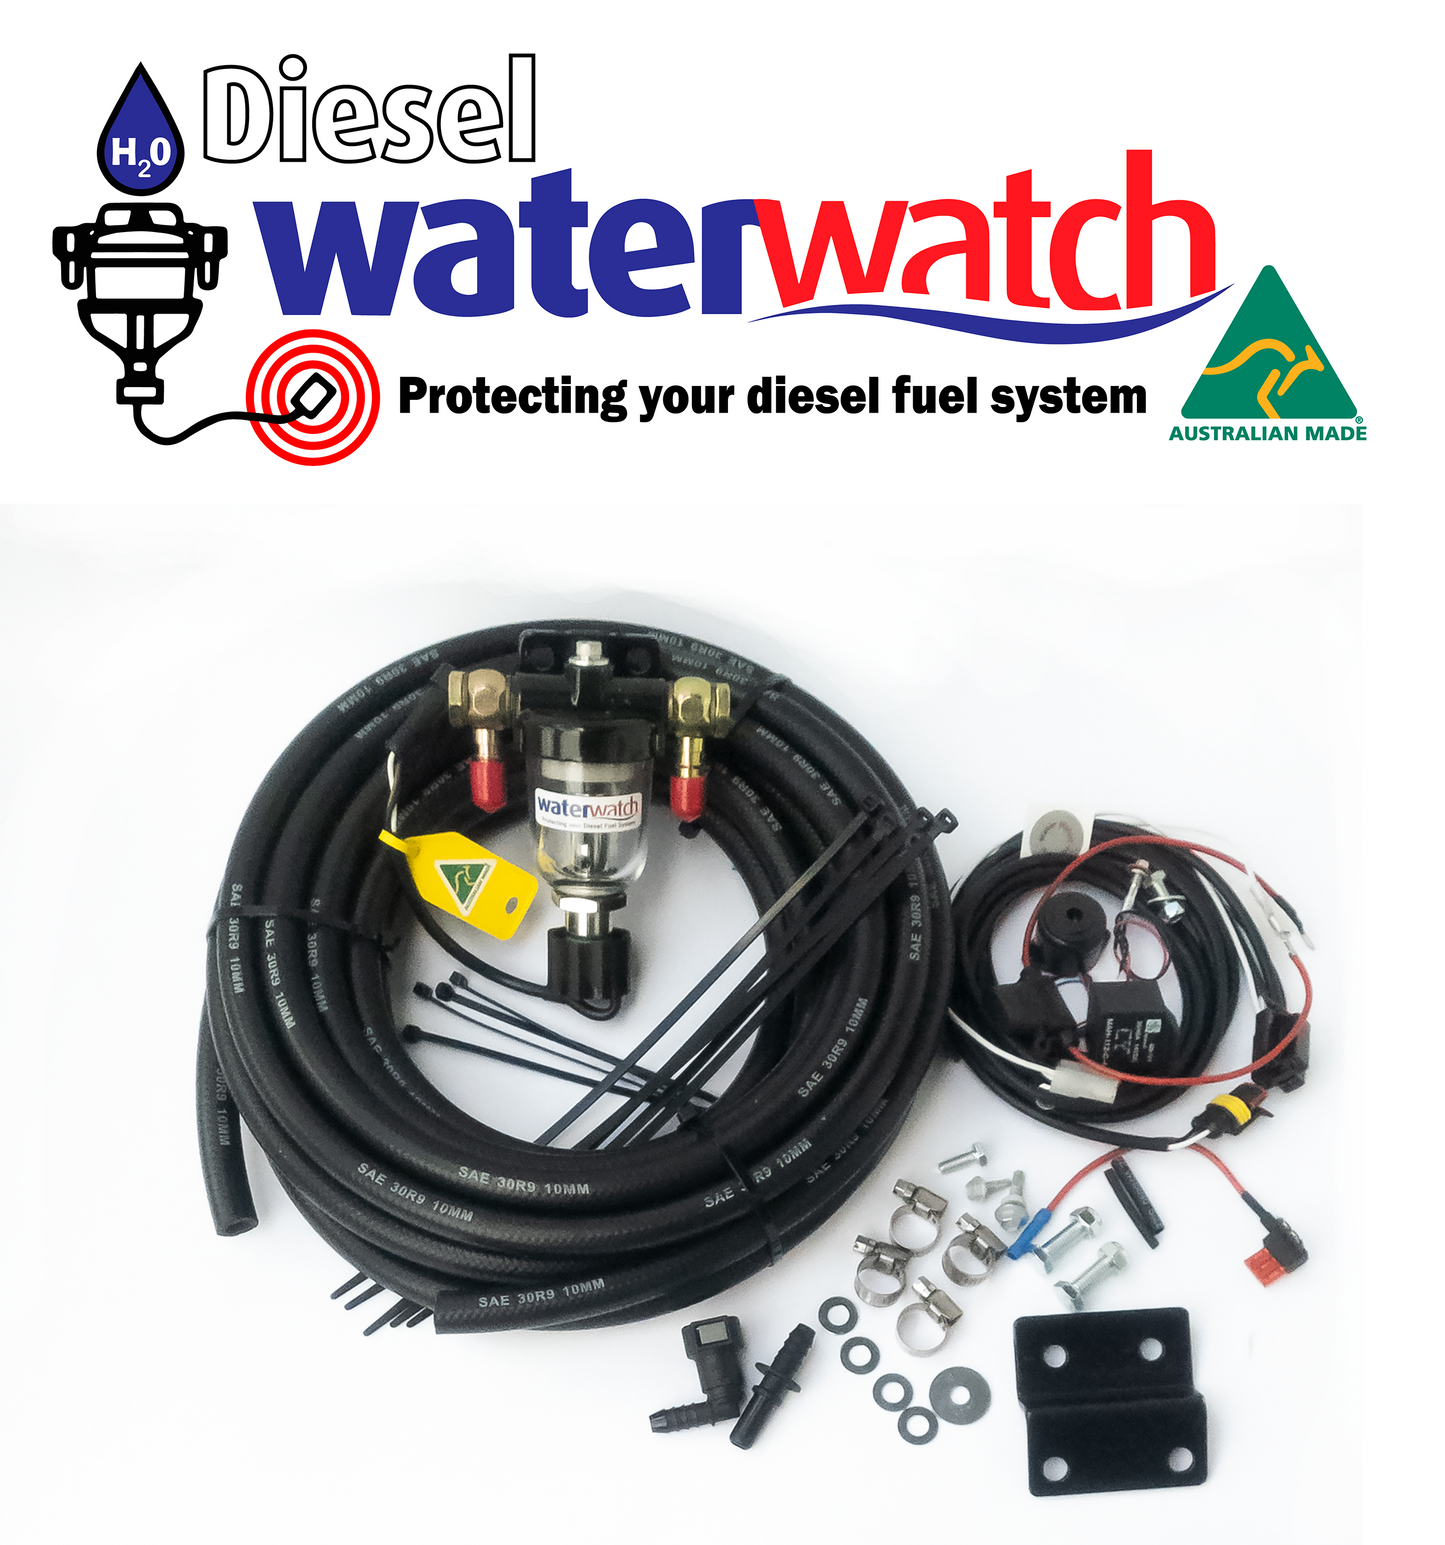 DIESEL Water Trap/Separator Pre-Filter Electronic Water Detection Ford Ranger Everest Next Gen 2022+ 2.0L & 3.0L - protection against Diesel Fuel Contamination Damage